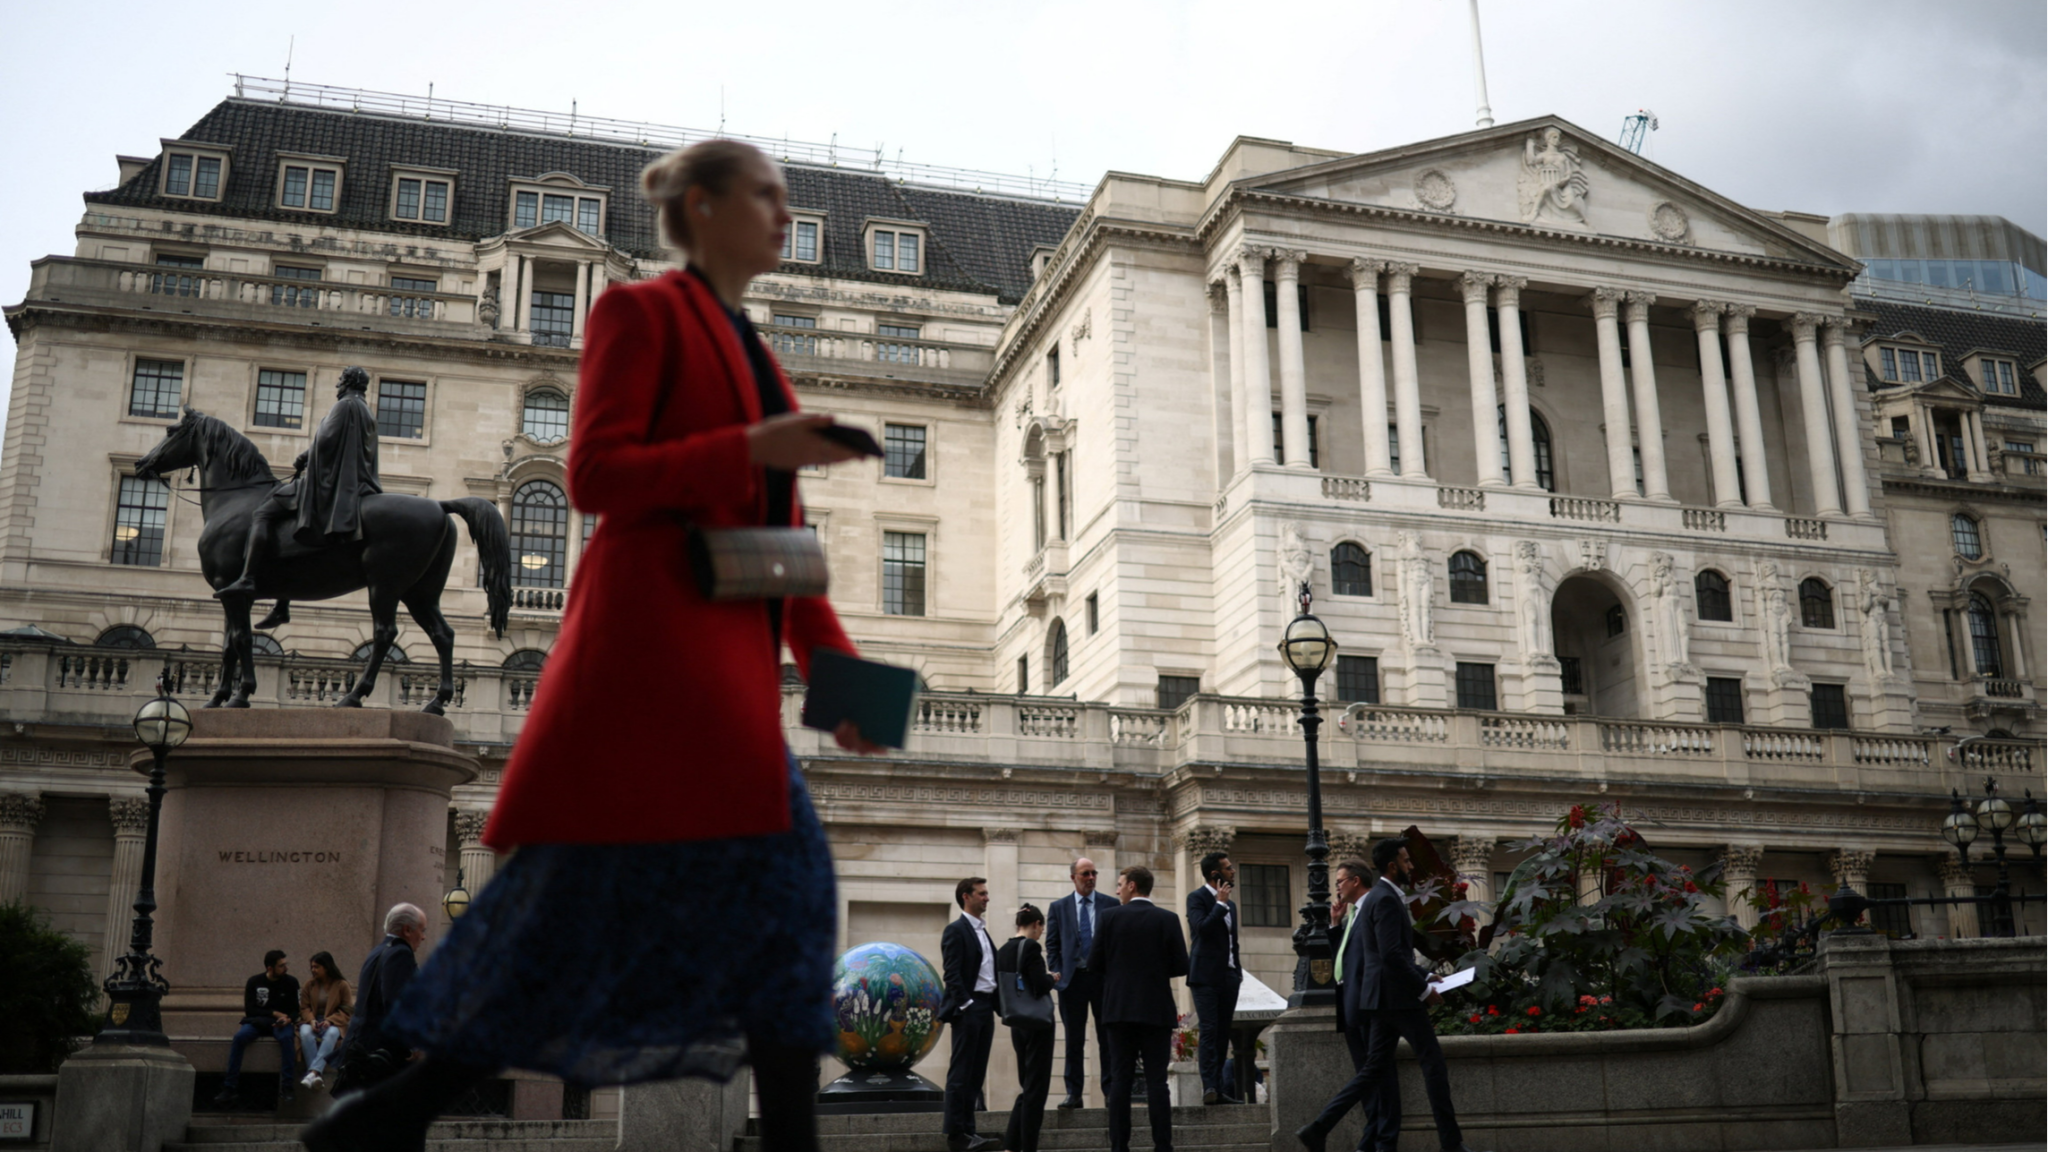 Bank of England buys just £22mn of bonds in latest purchasing operation